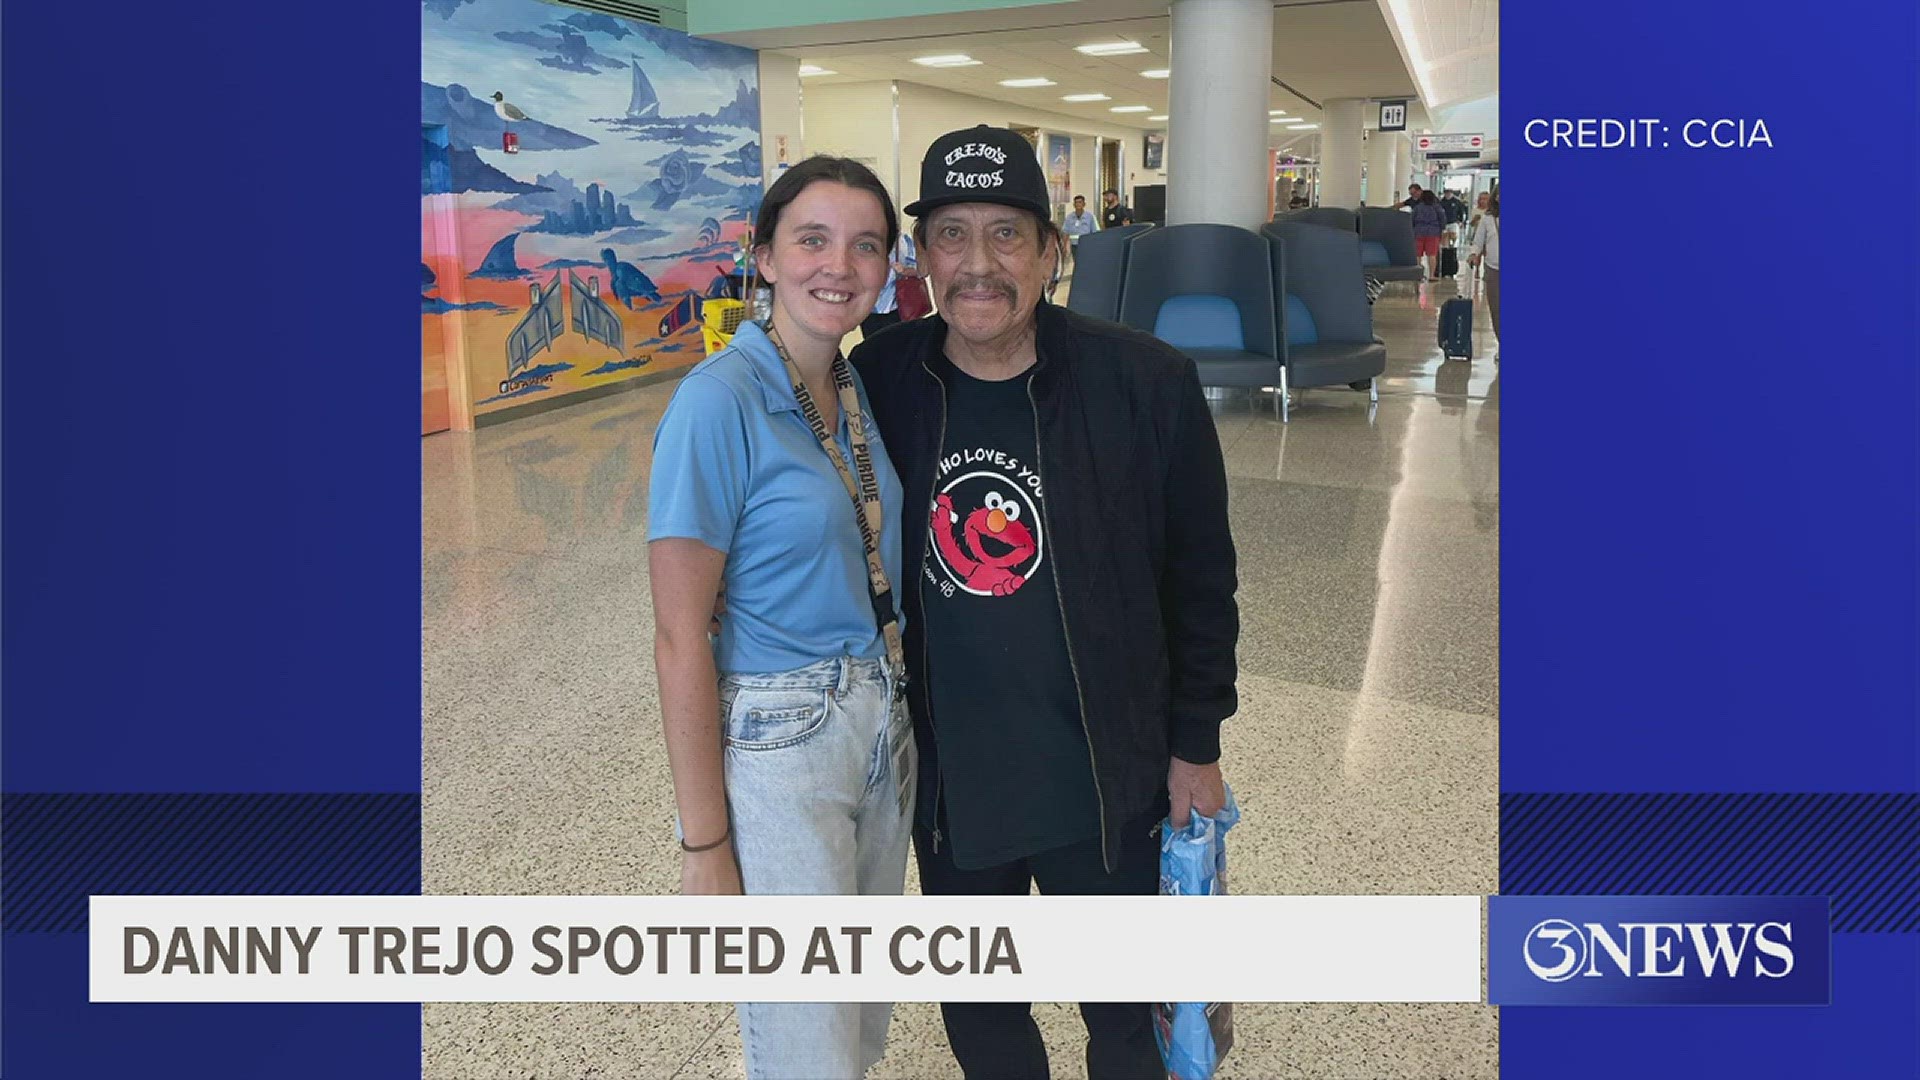 Trejo is in town for the Boys & Girls of Alice's 29th Annual Steak & Burger Dinner fundraiser, where he is featured as the event's keynote speaker.